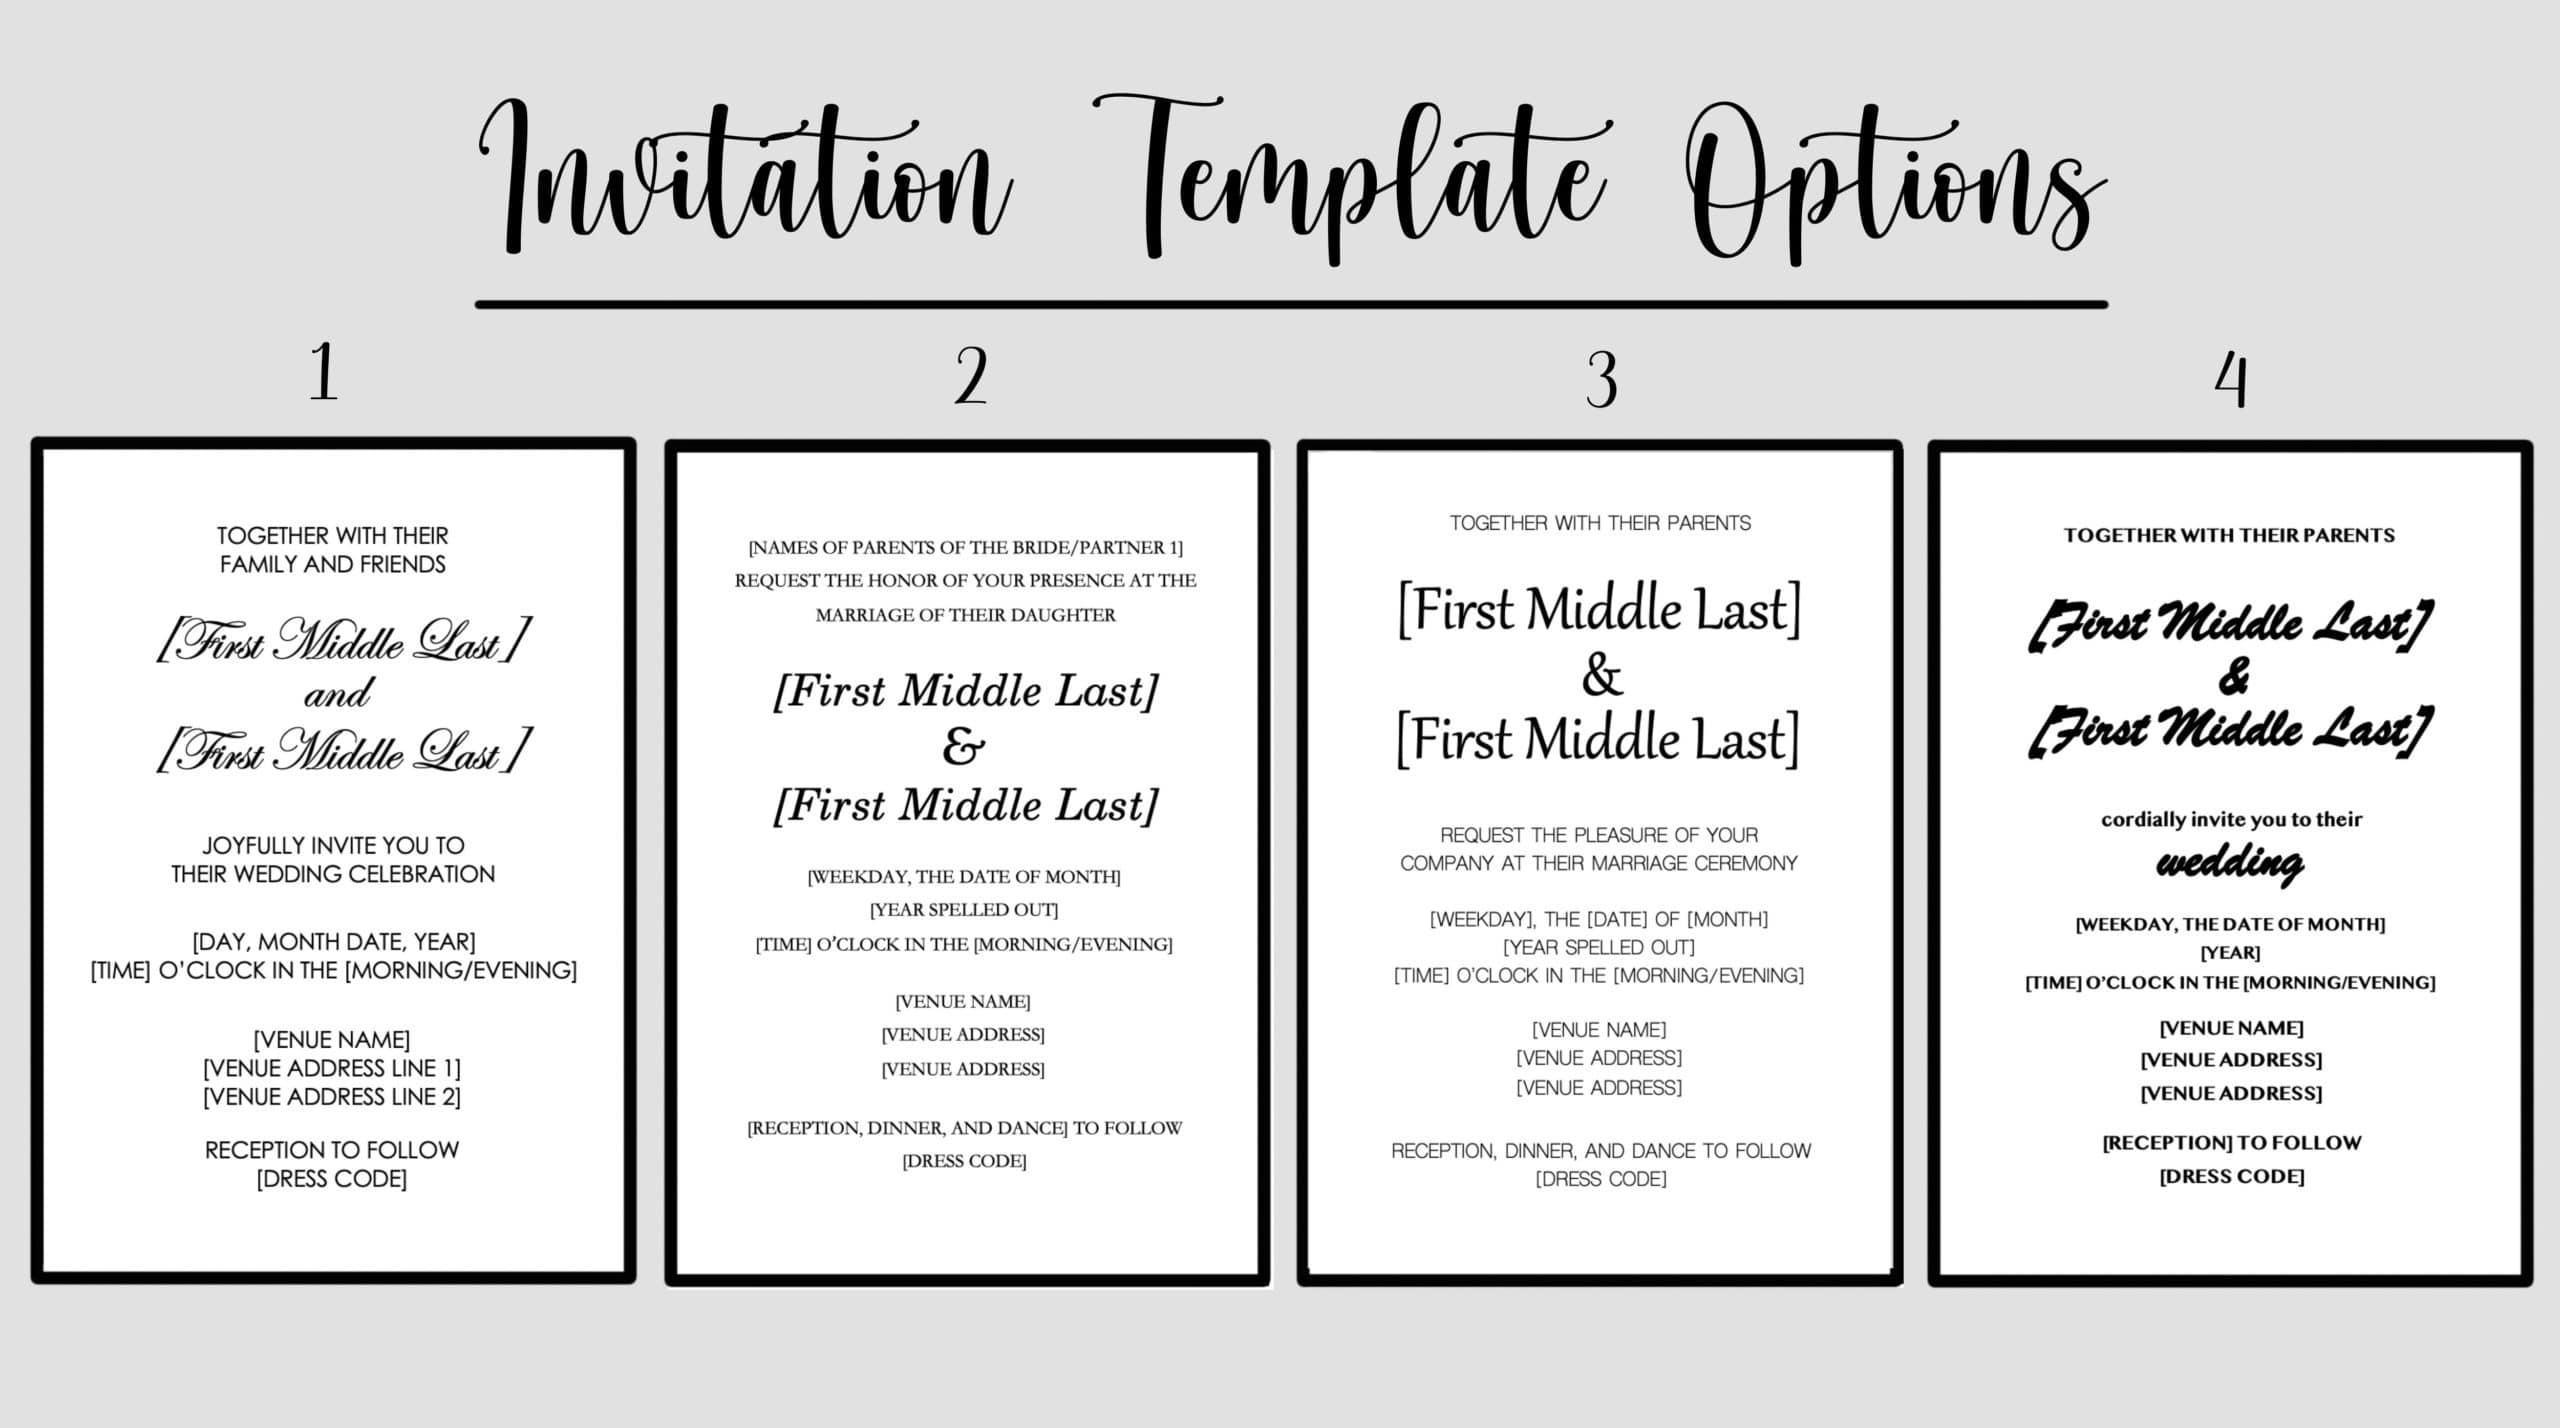 Invitation Template Options with numbers